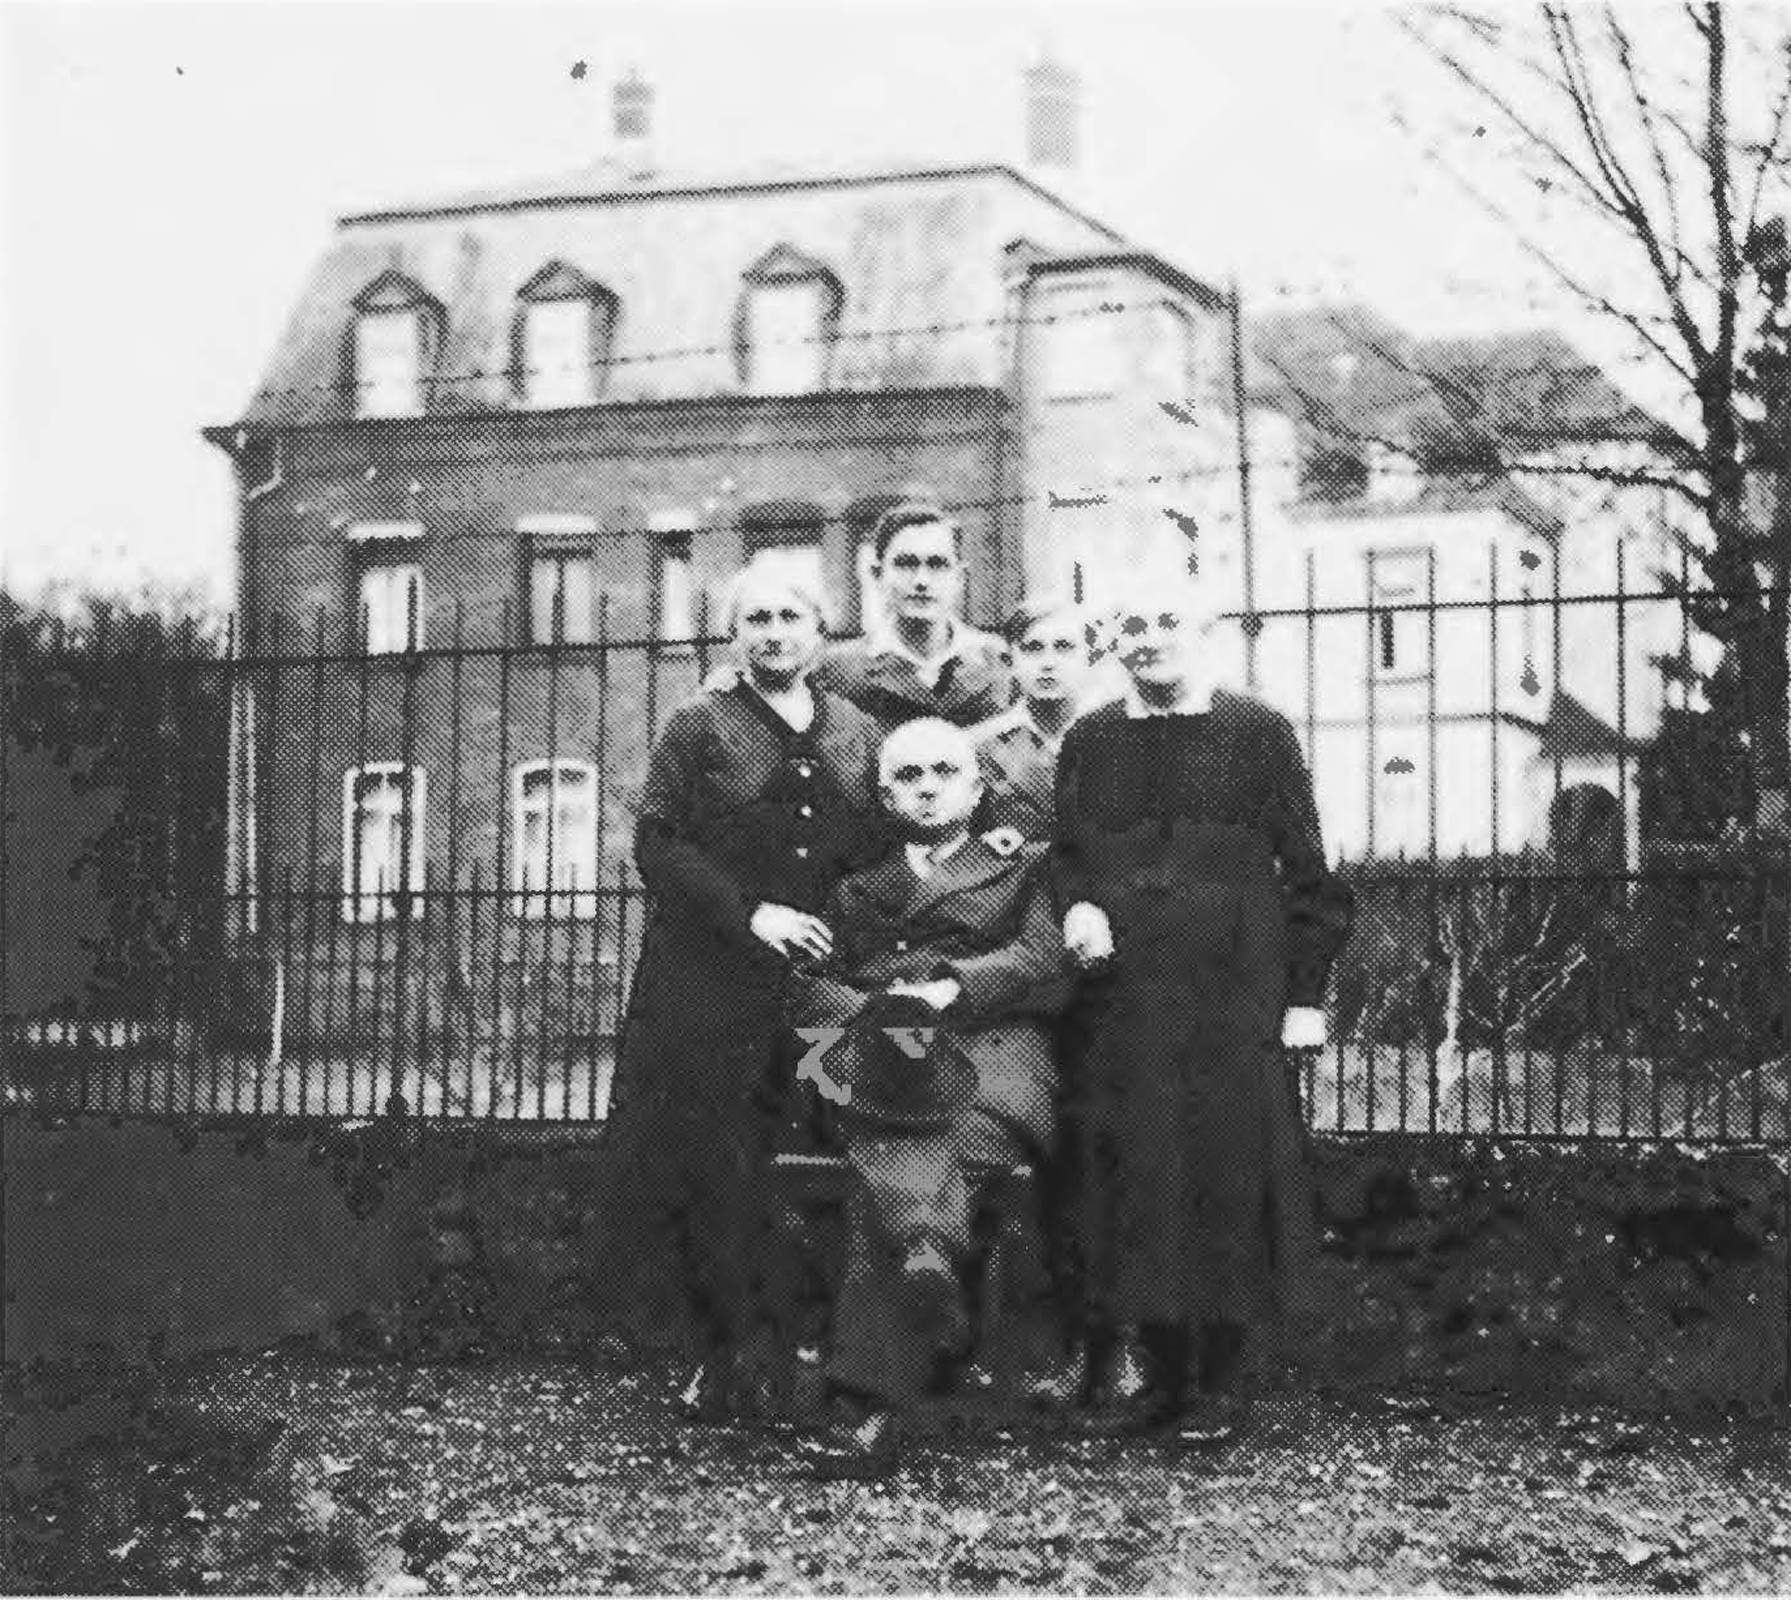 The family with the maternal grandmother in Schwäbisch Gmünd in 1936.